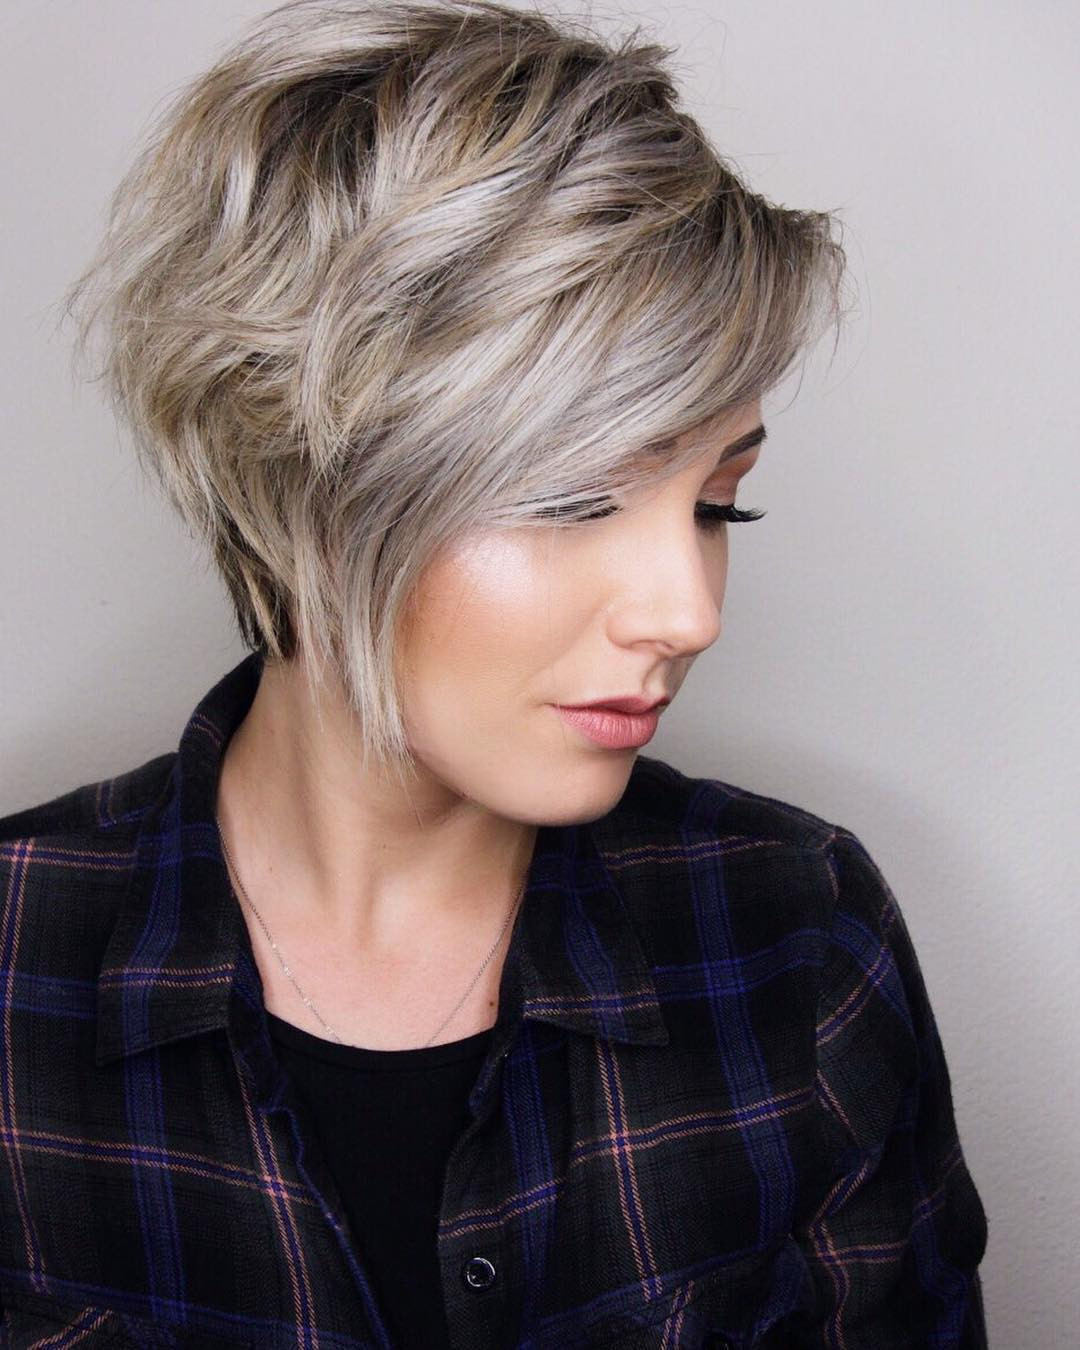 Best Short Haircuts For Thick Hair
 10 Trendy Layered Short Haircut Ideas 2020 Extra